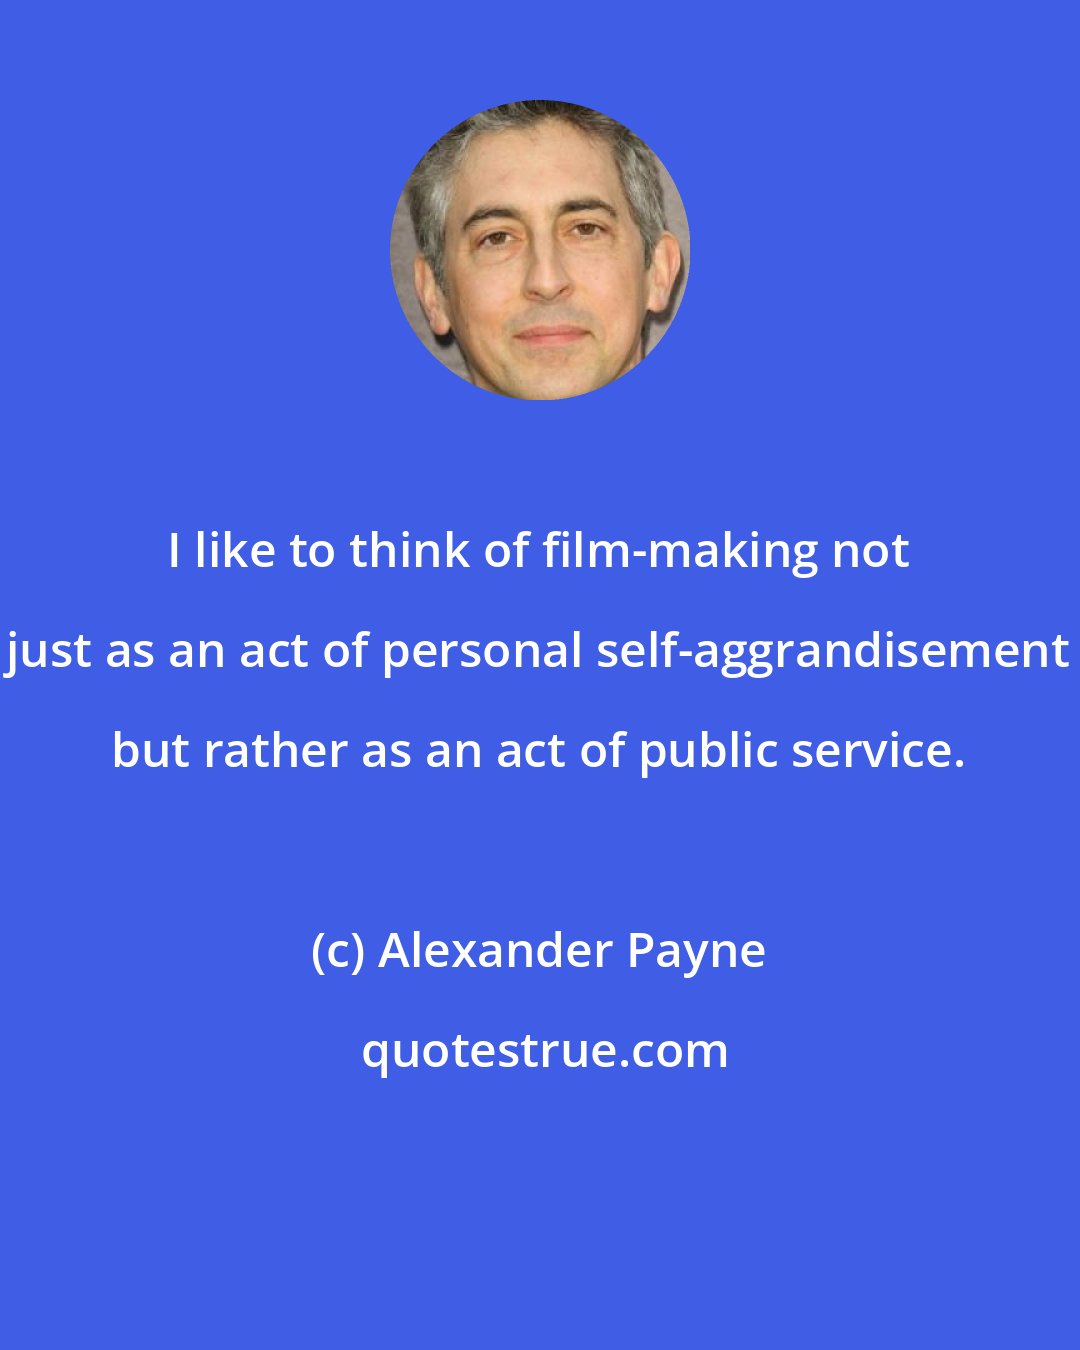 Alexander Payne: I like to think of film-making not just as an act of personal self-aggrandisement but rather as an act of public service.